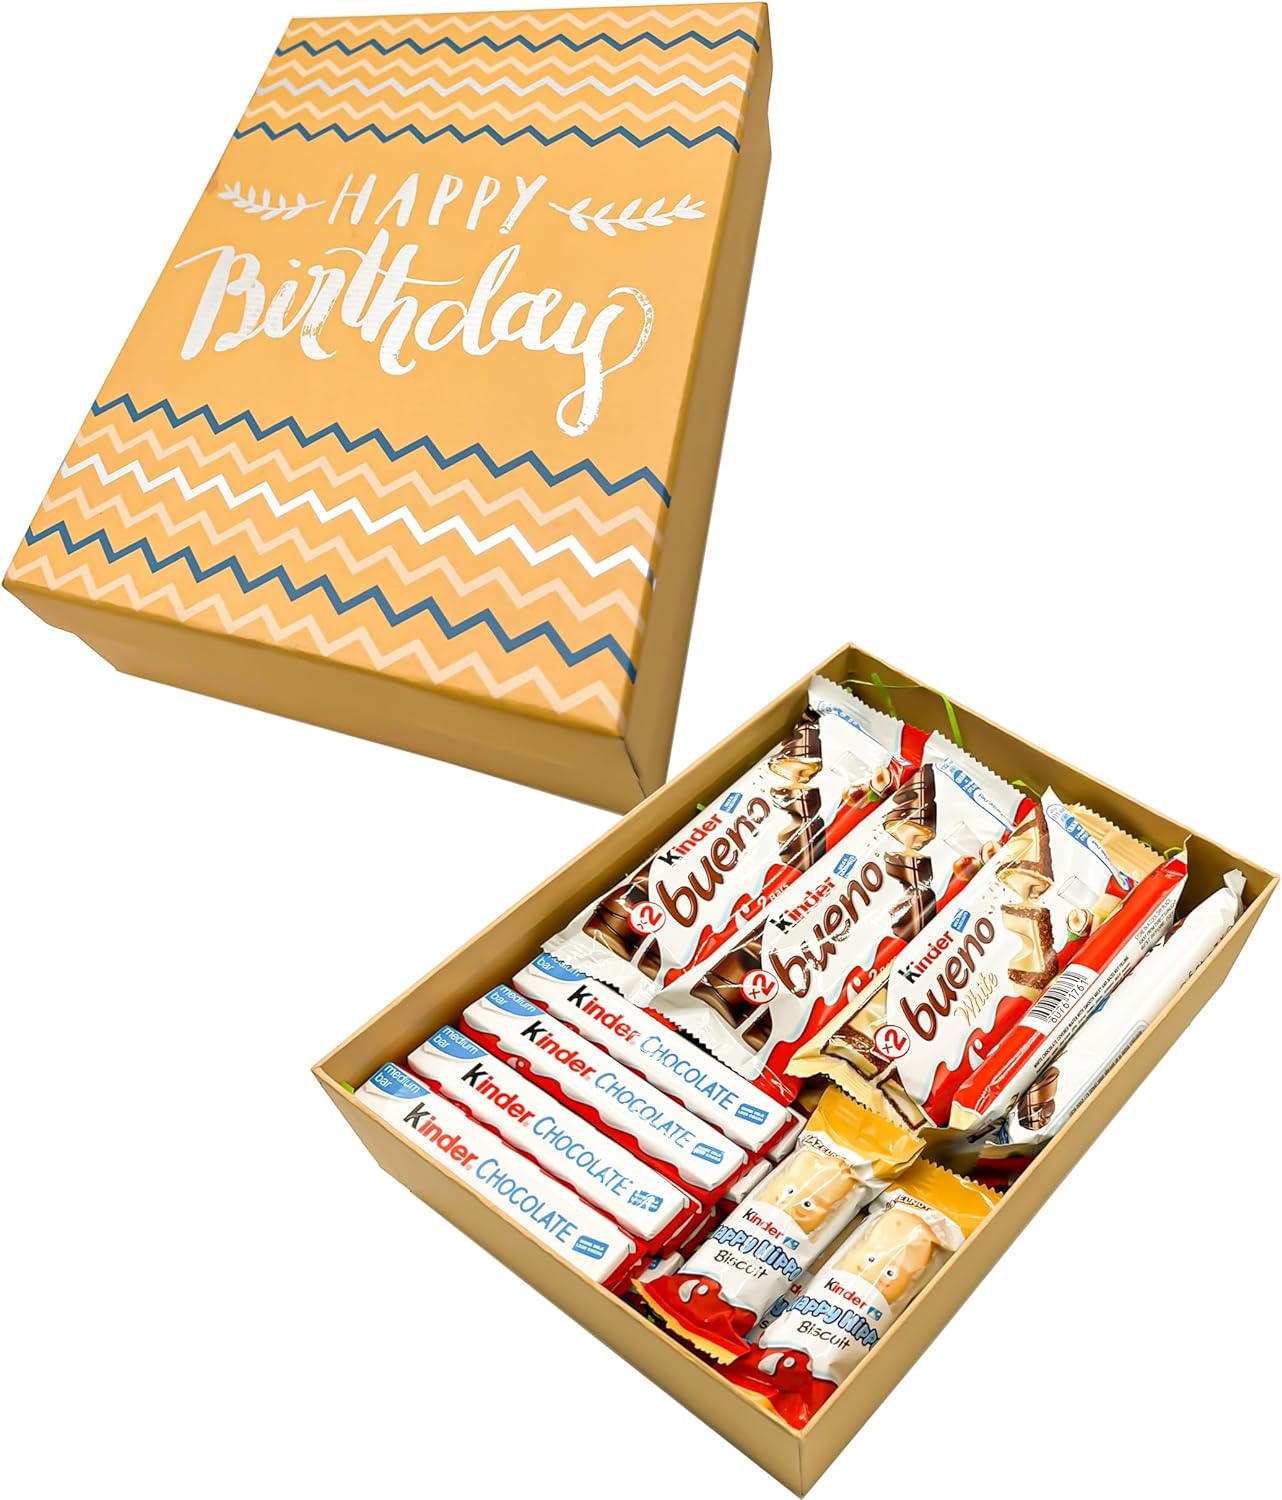 Kinder Bueno Variety Gift Box - A Festive Selection of Bueno Chocolate, Bueno White, Hippo Biscuits, Bars, Ideal for Every Occasion 20 Chocolates